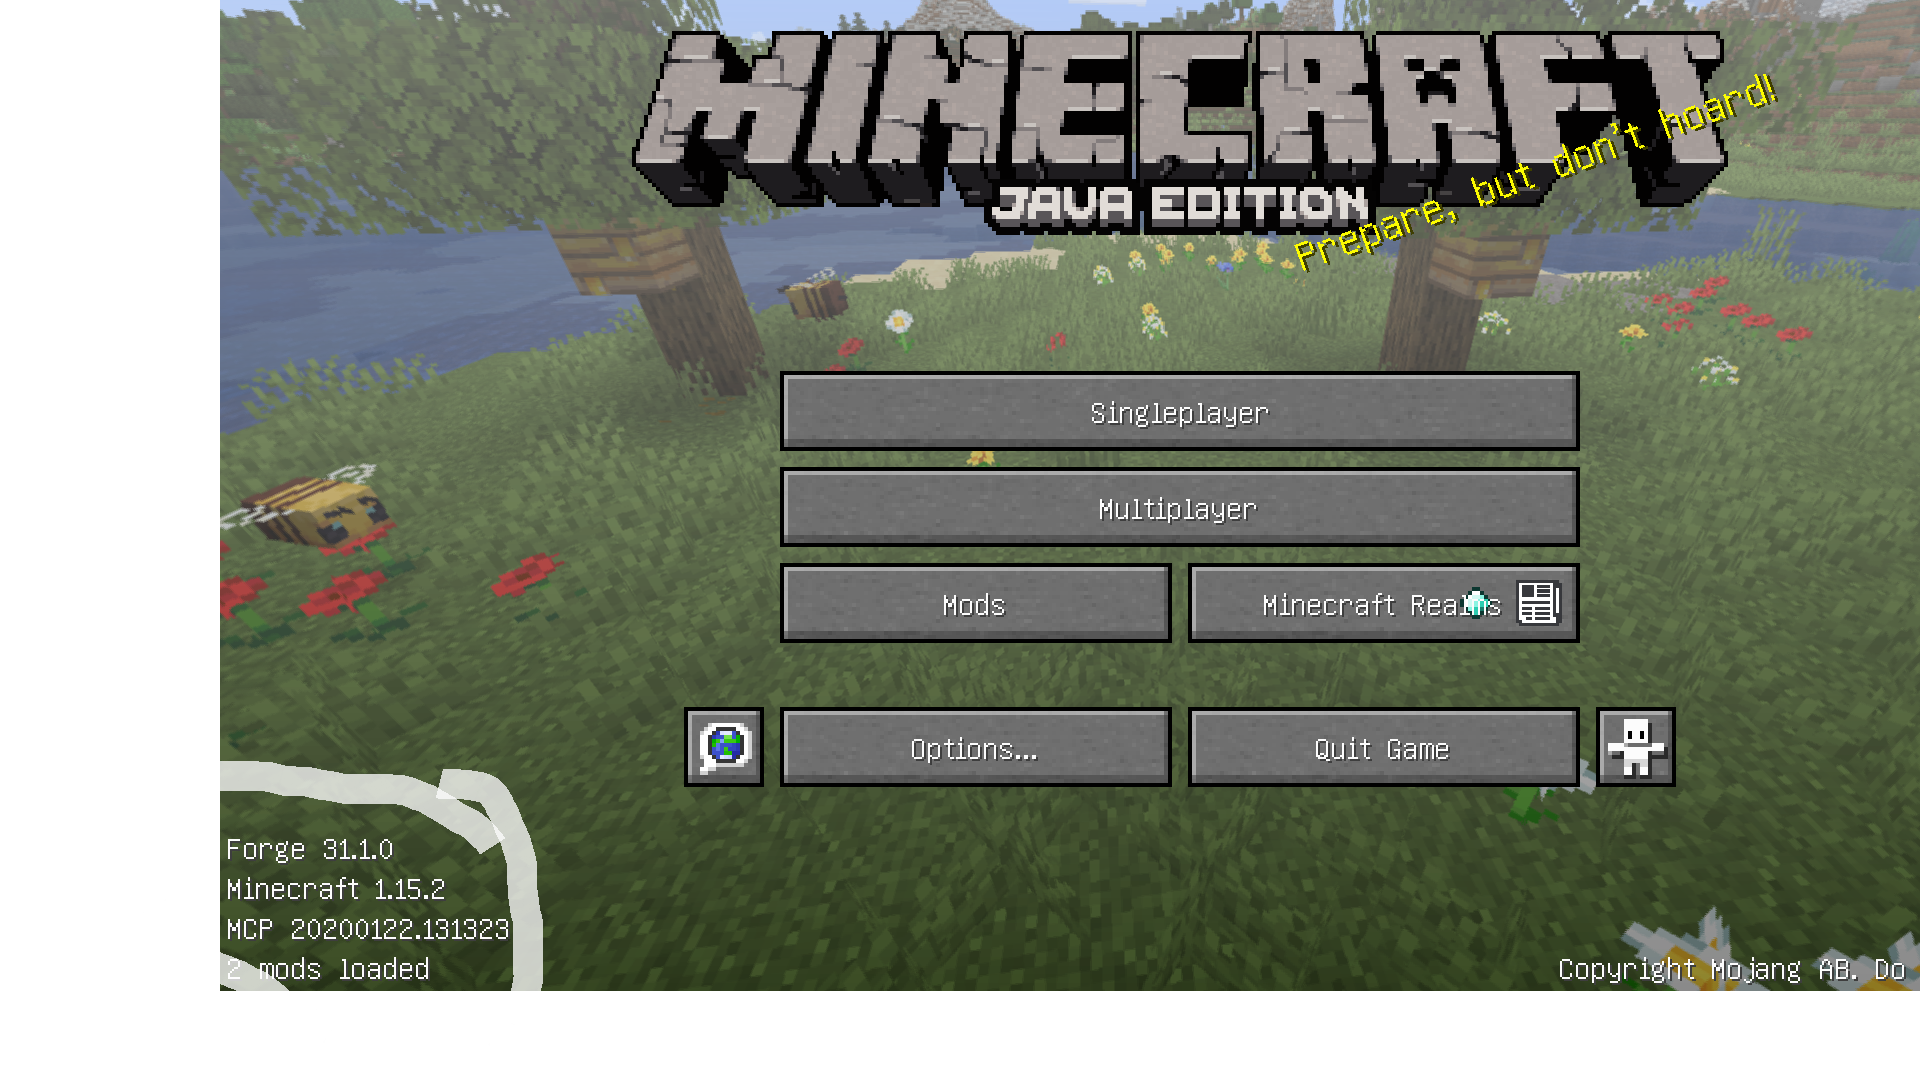 how to set up a modded minecraft server